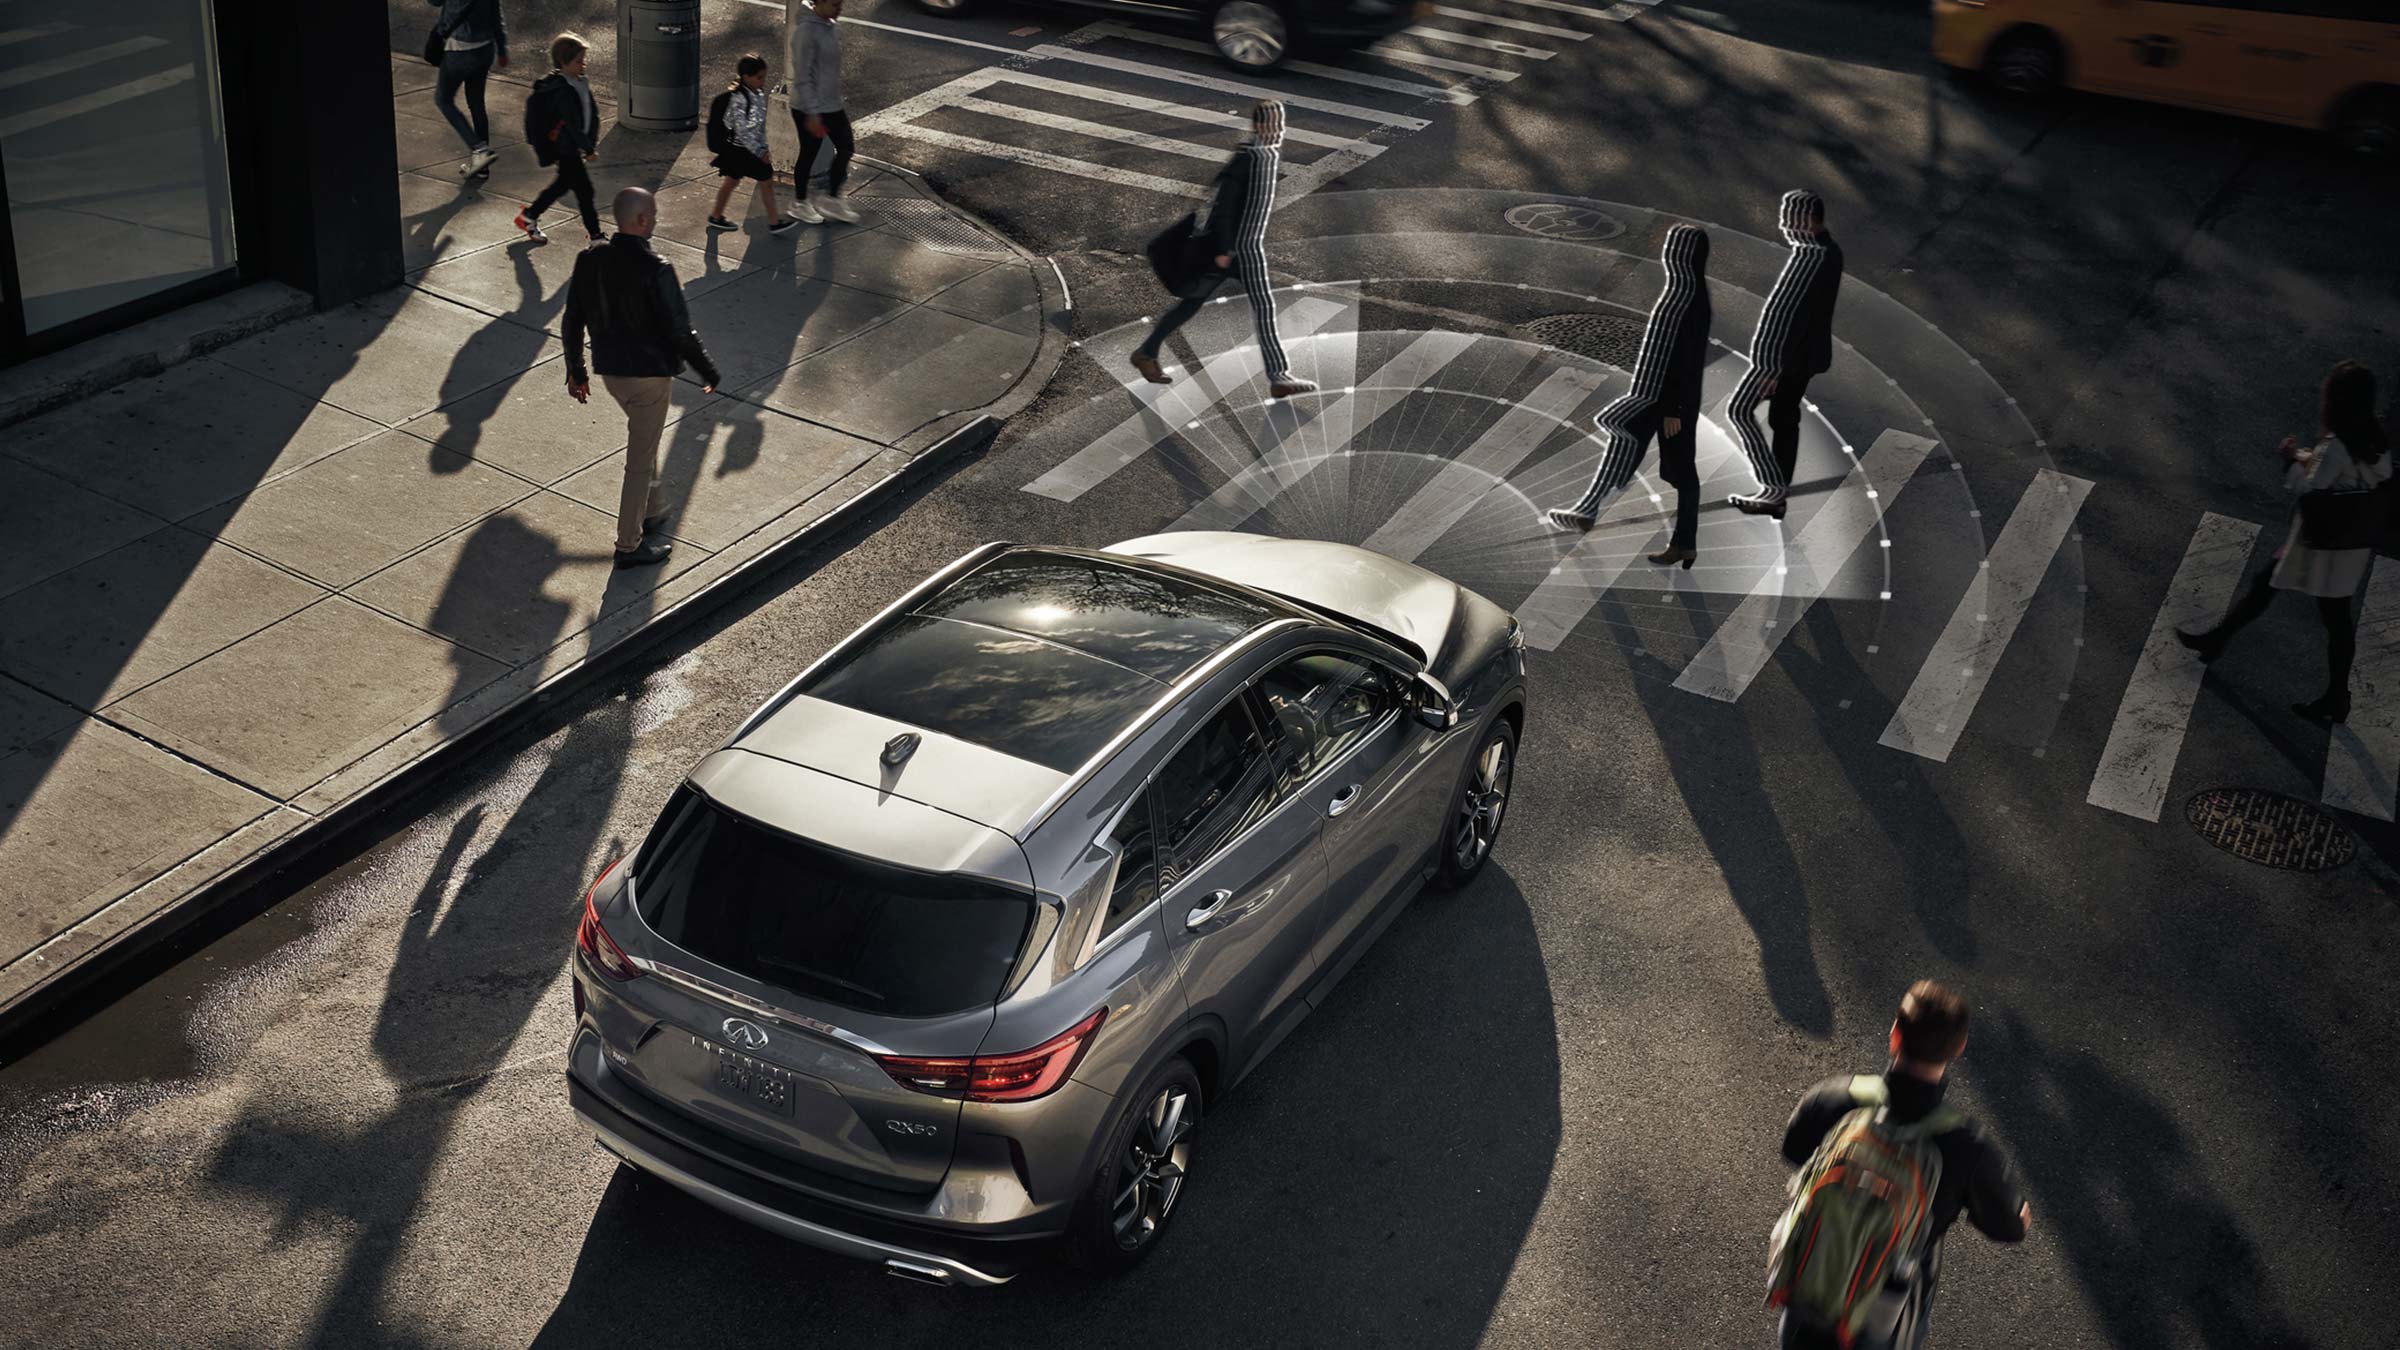 A bird's eye view of the 2022 INFINITI QX50 SUV parked.